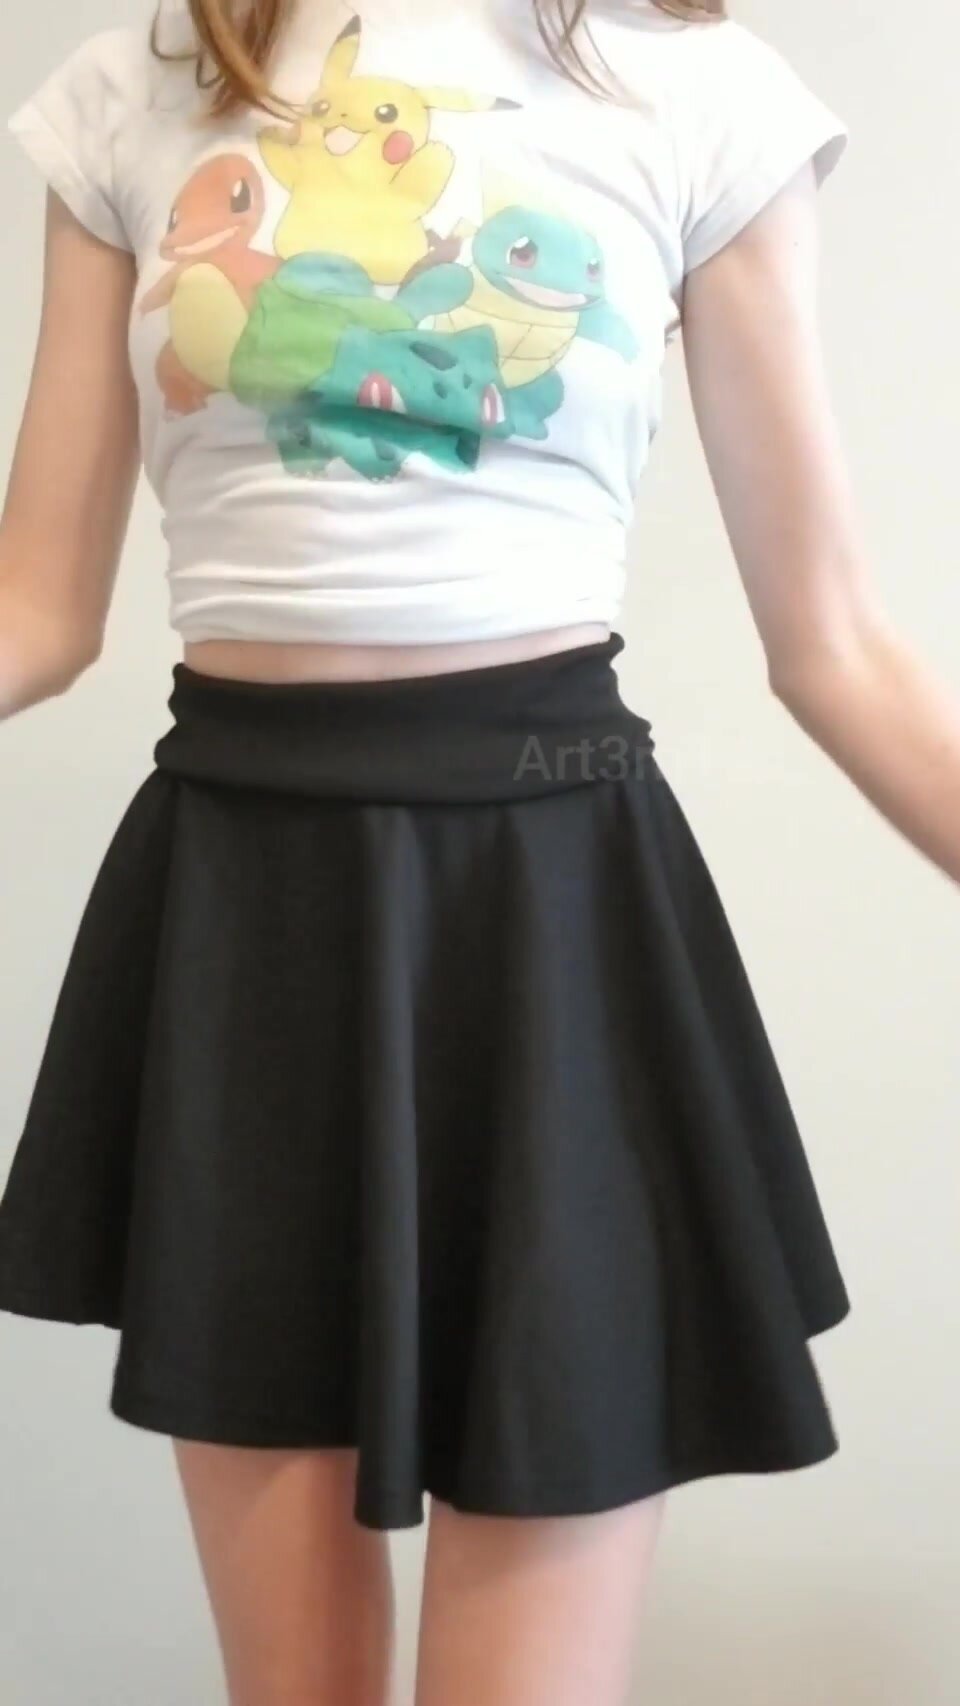 This skirt may look cute and innocent, but the lack of panties makes it naughty